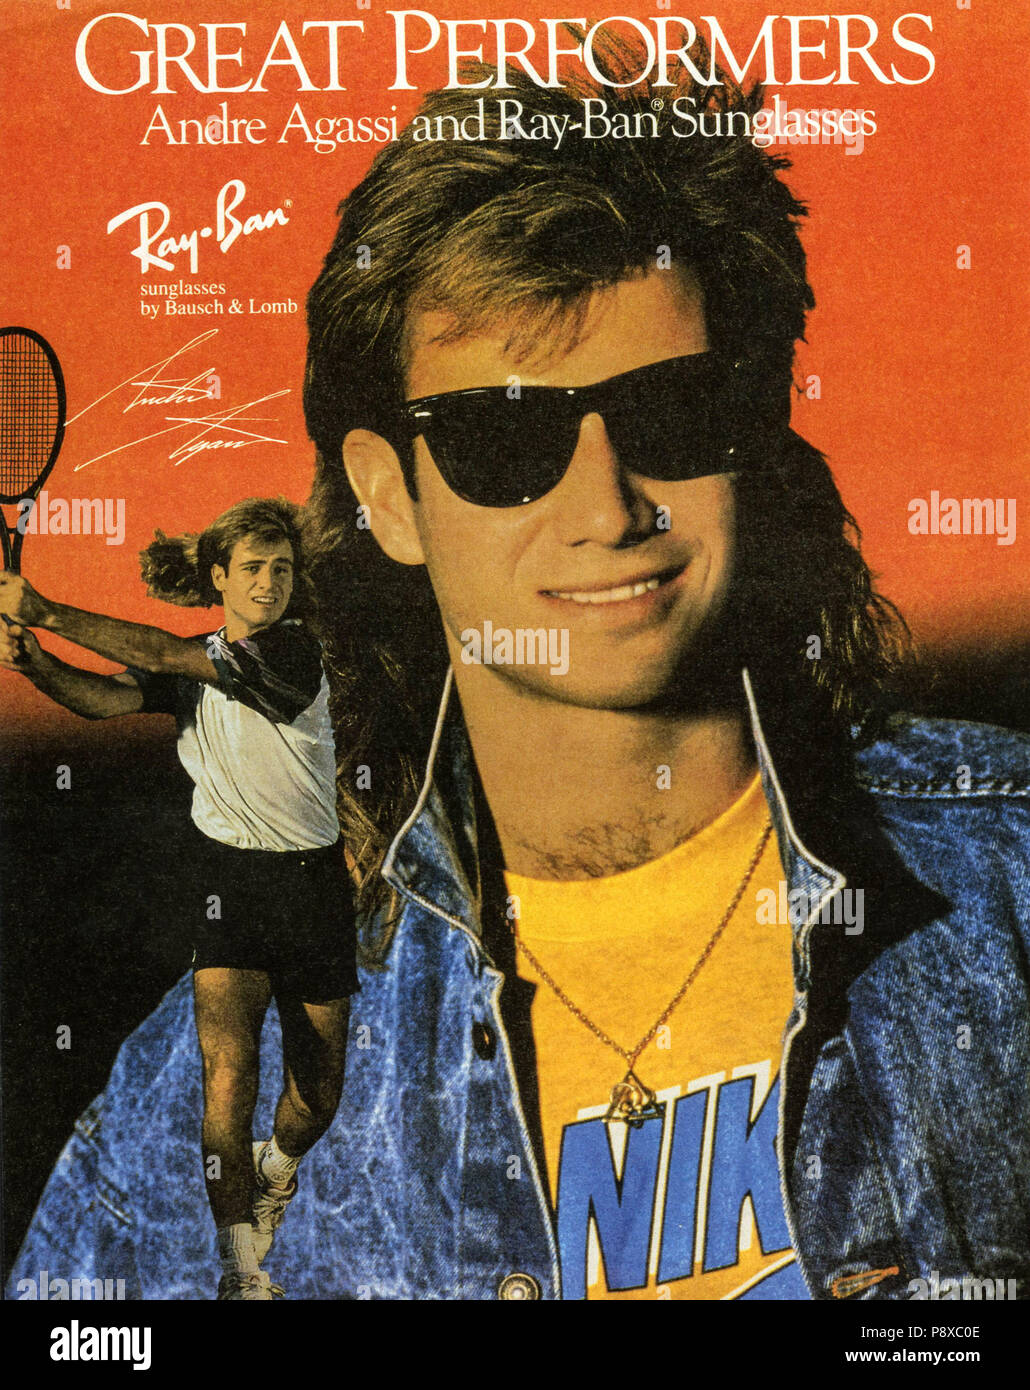 Andre Agassi Sunglasses High Resolution Stock Photography and Images - Alamy